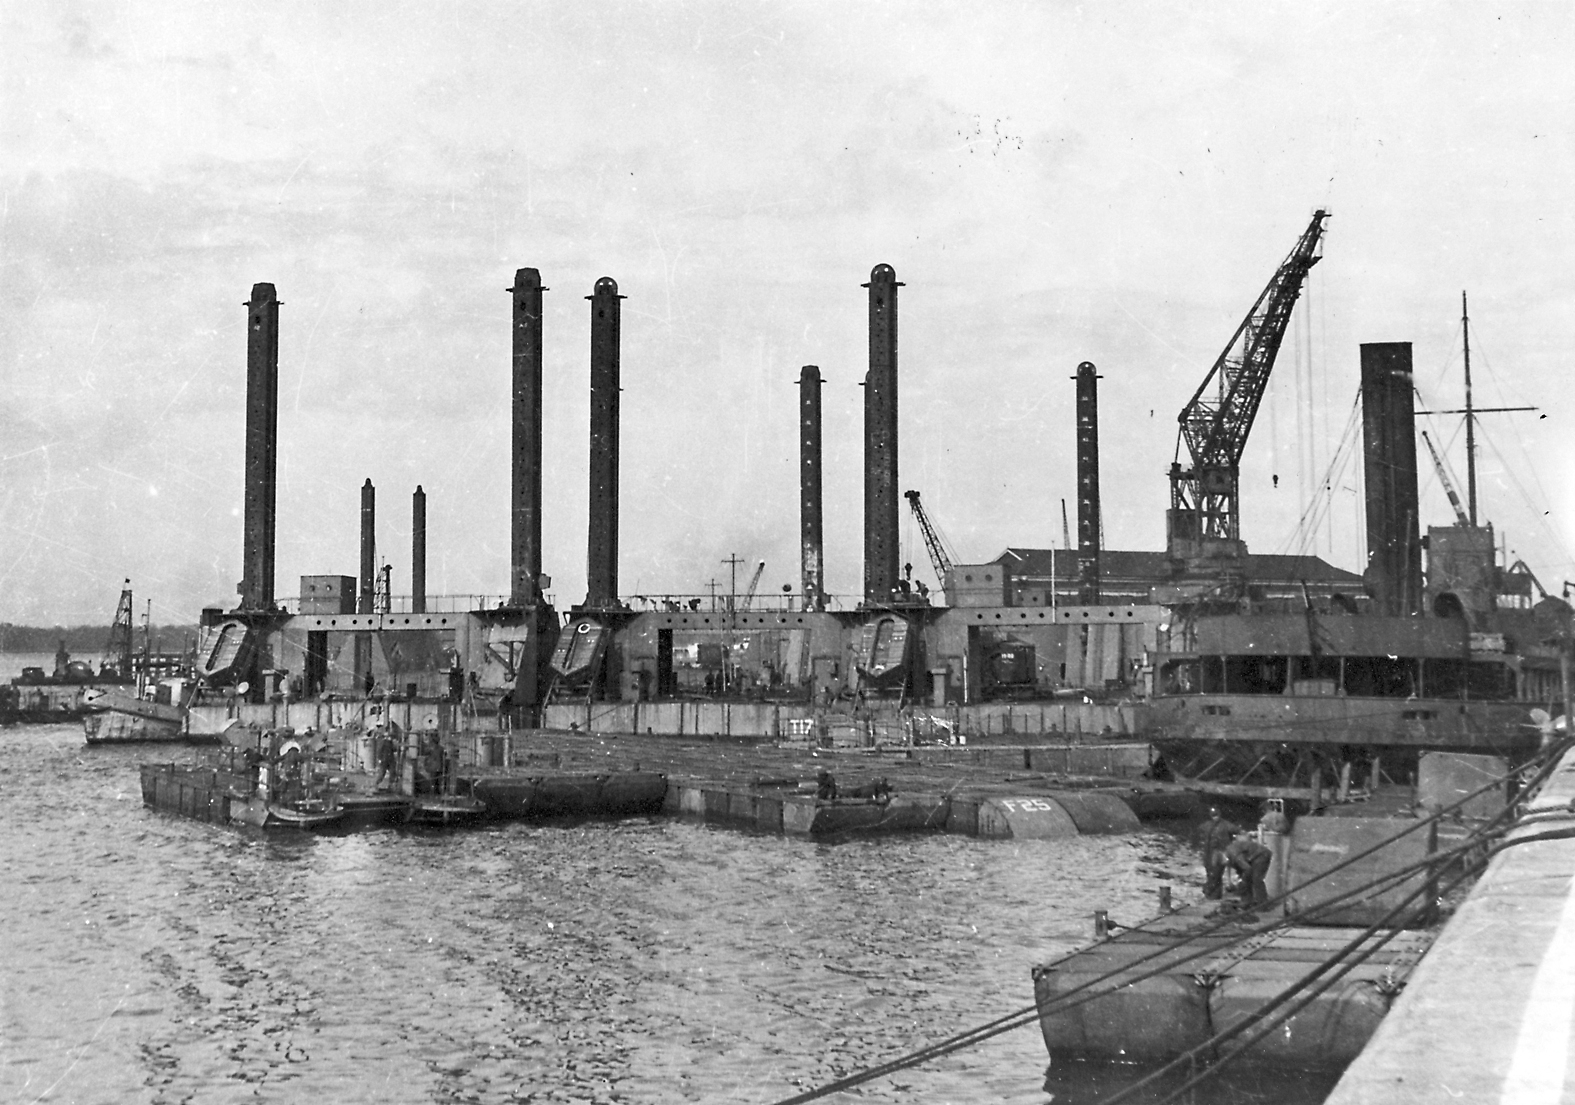 Construction of the Mulberry Harbour at Southampton docks ahead of the D-Day landings.